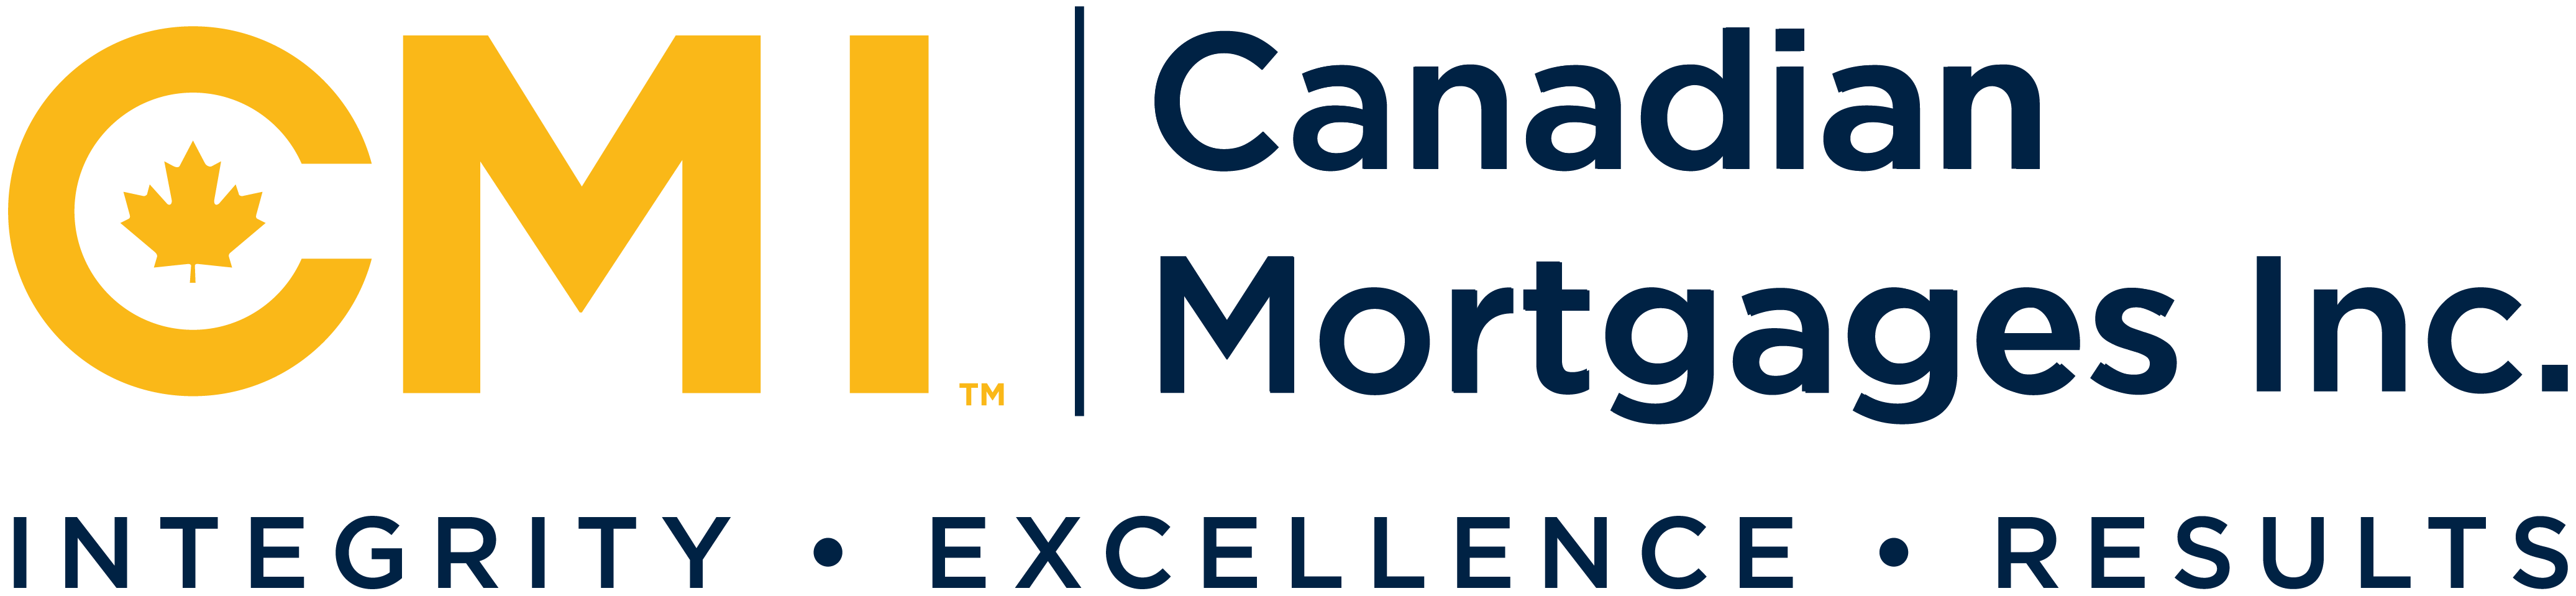 Canadian Mortgages Inc.